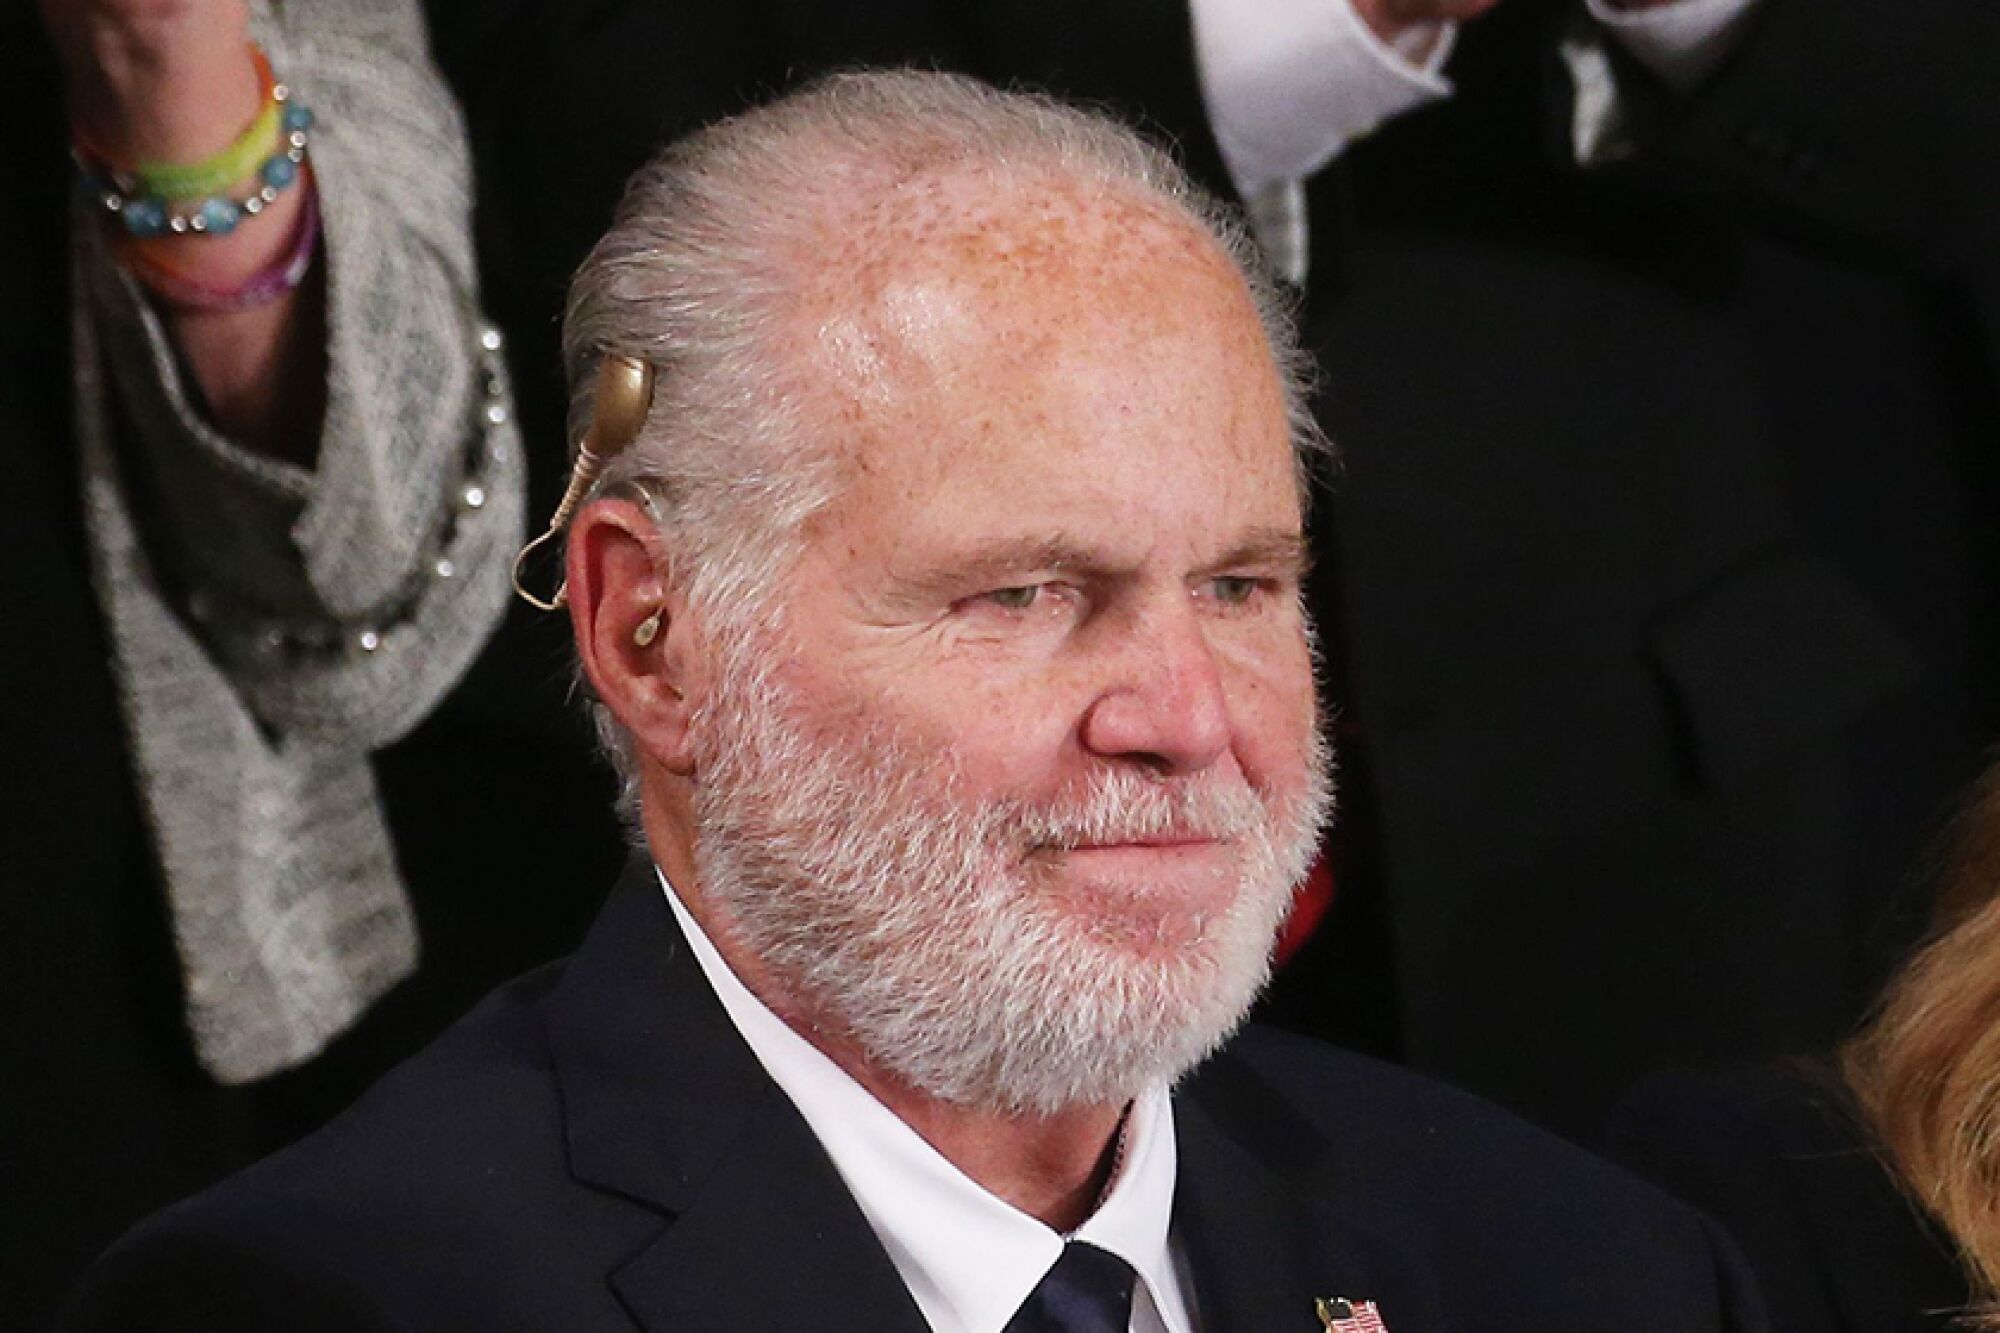 Rush Limbaugh at the State of the Union address in February 2020.